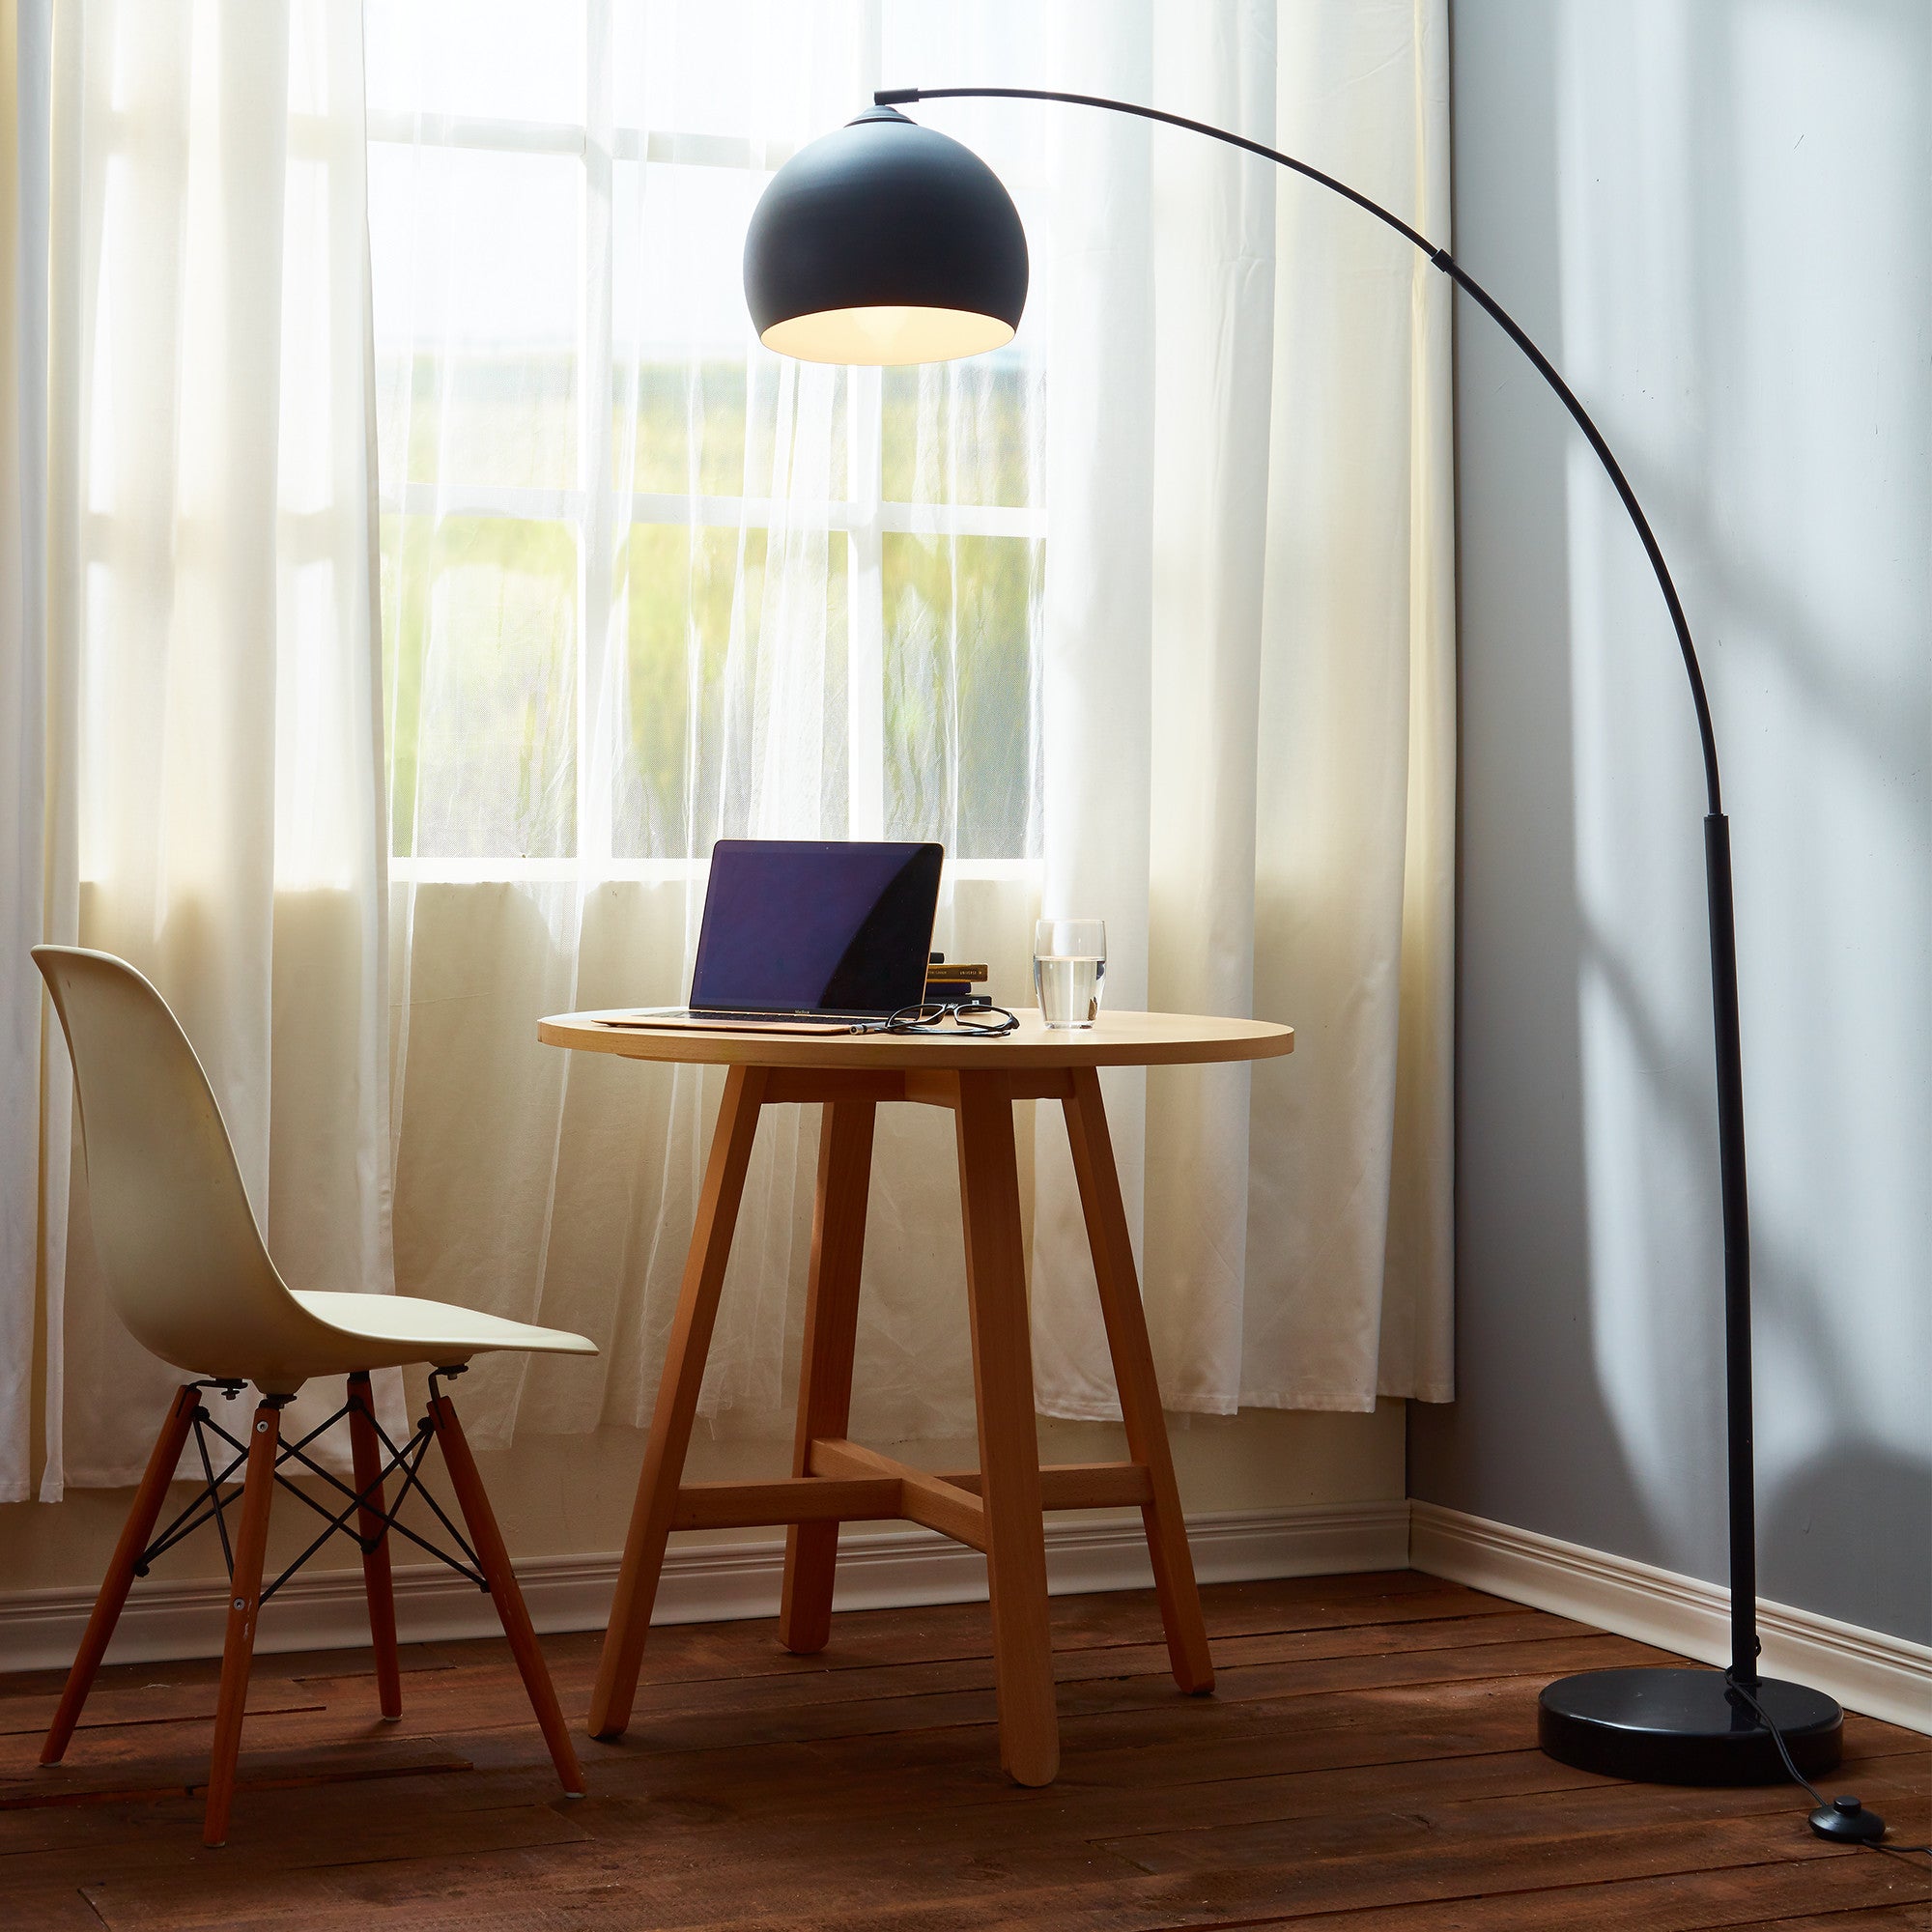 Teamson Home Arquer Arc Metal Floor Lamp with Bell Shade, Black